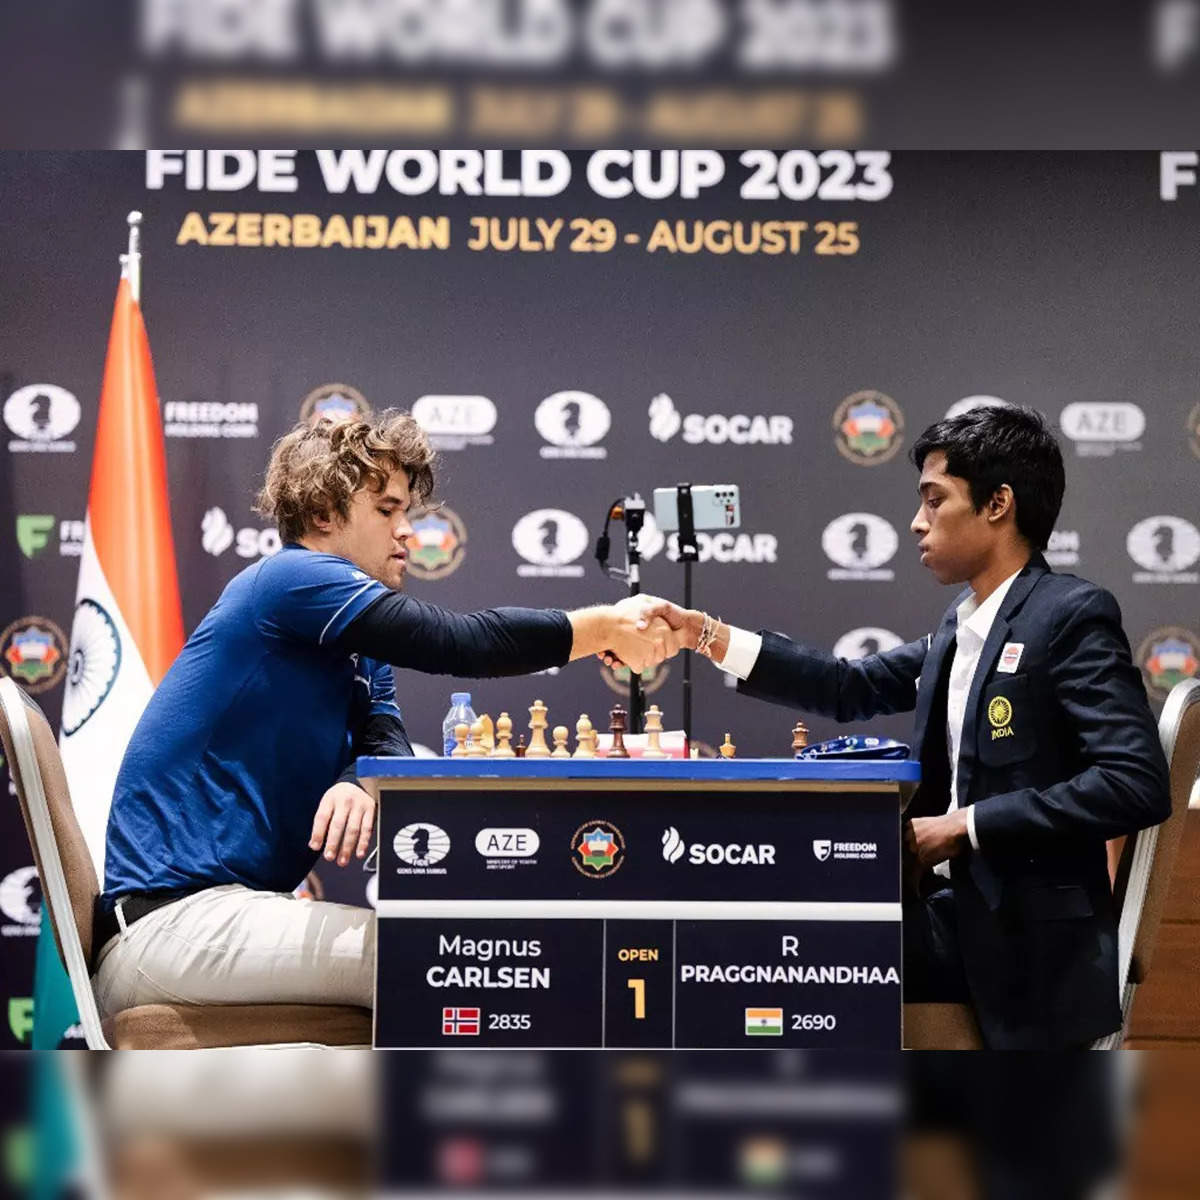 2020 Chess World Championship Odds - Magnus Carlsen Listed as Heavy Favorite